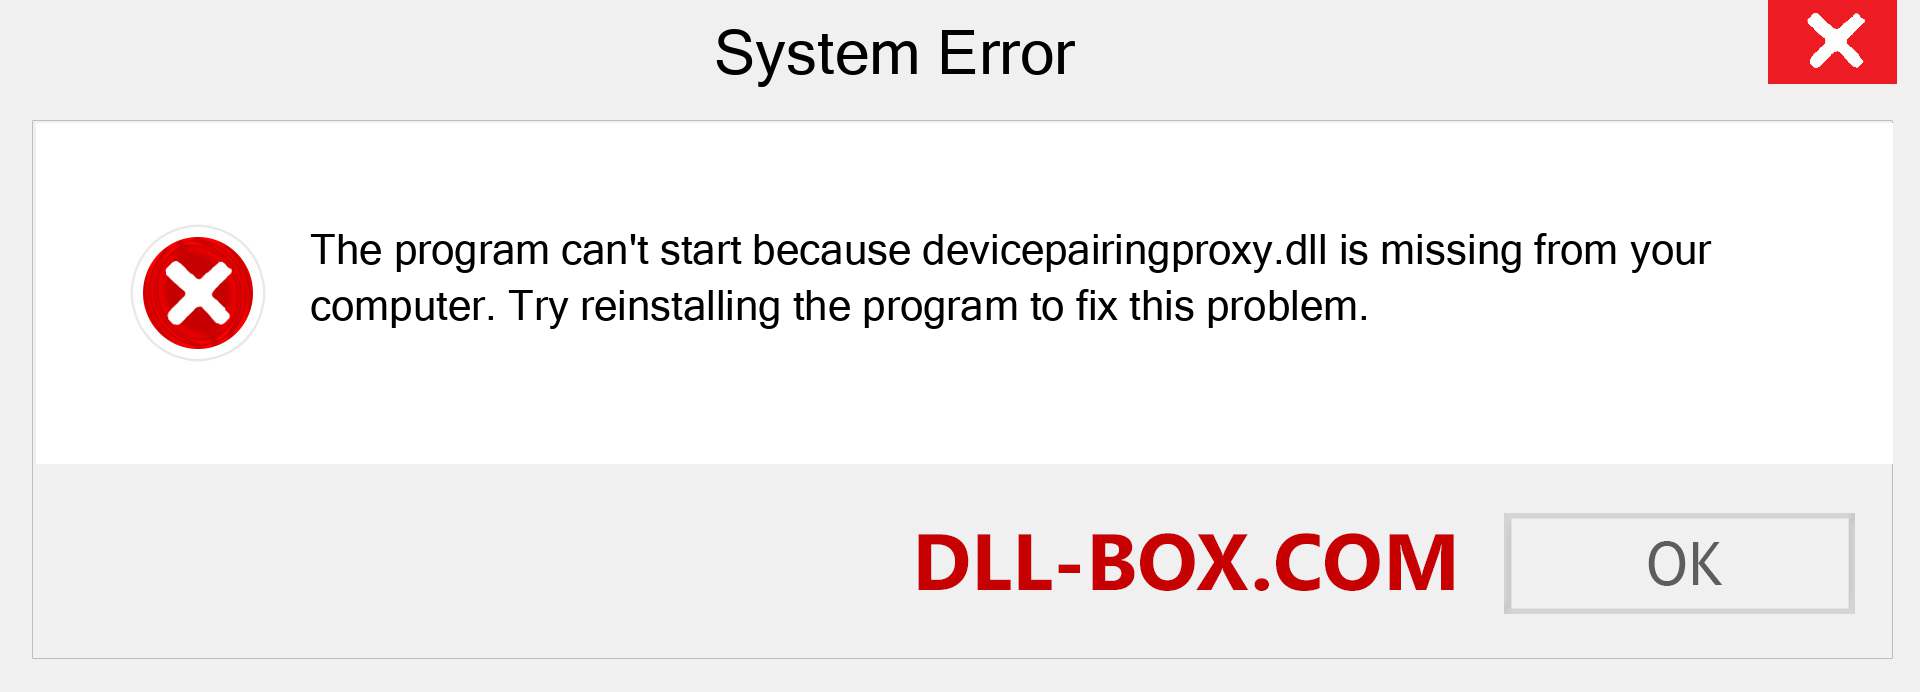  devicepairingproxy.dll file is missing?. Download for Windows 7, 8, 10 - Fix  devicepairingproxy dll Missing Error on Windows, photos, images